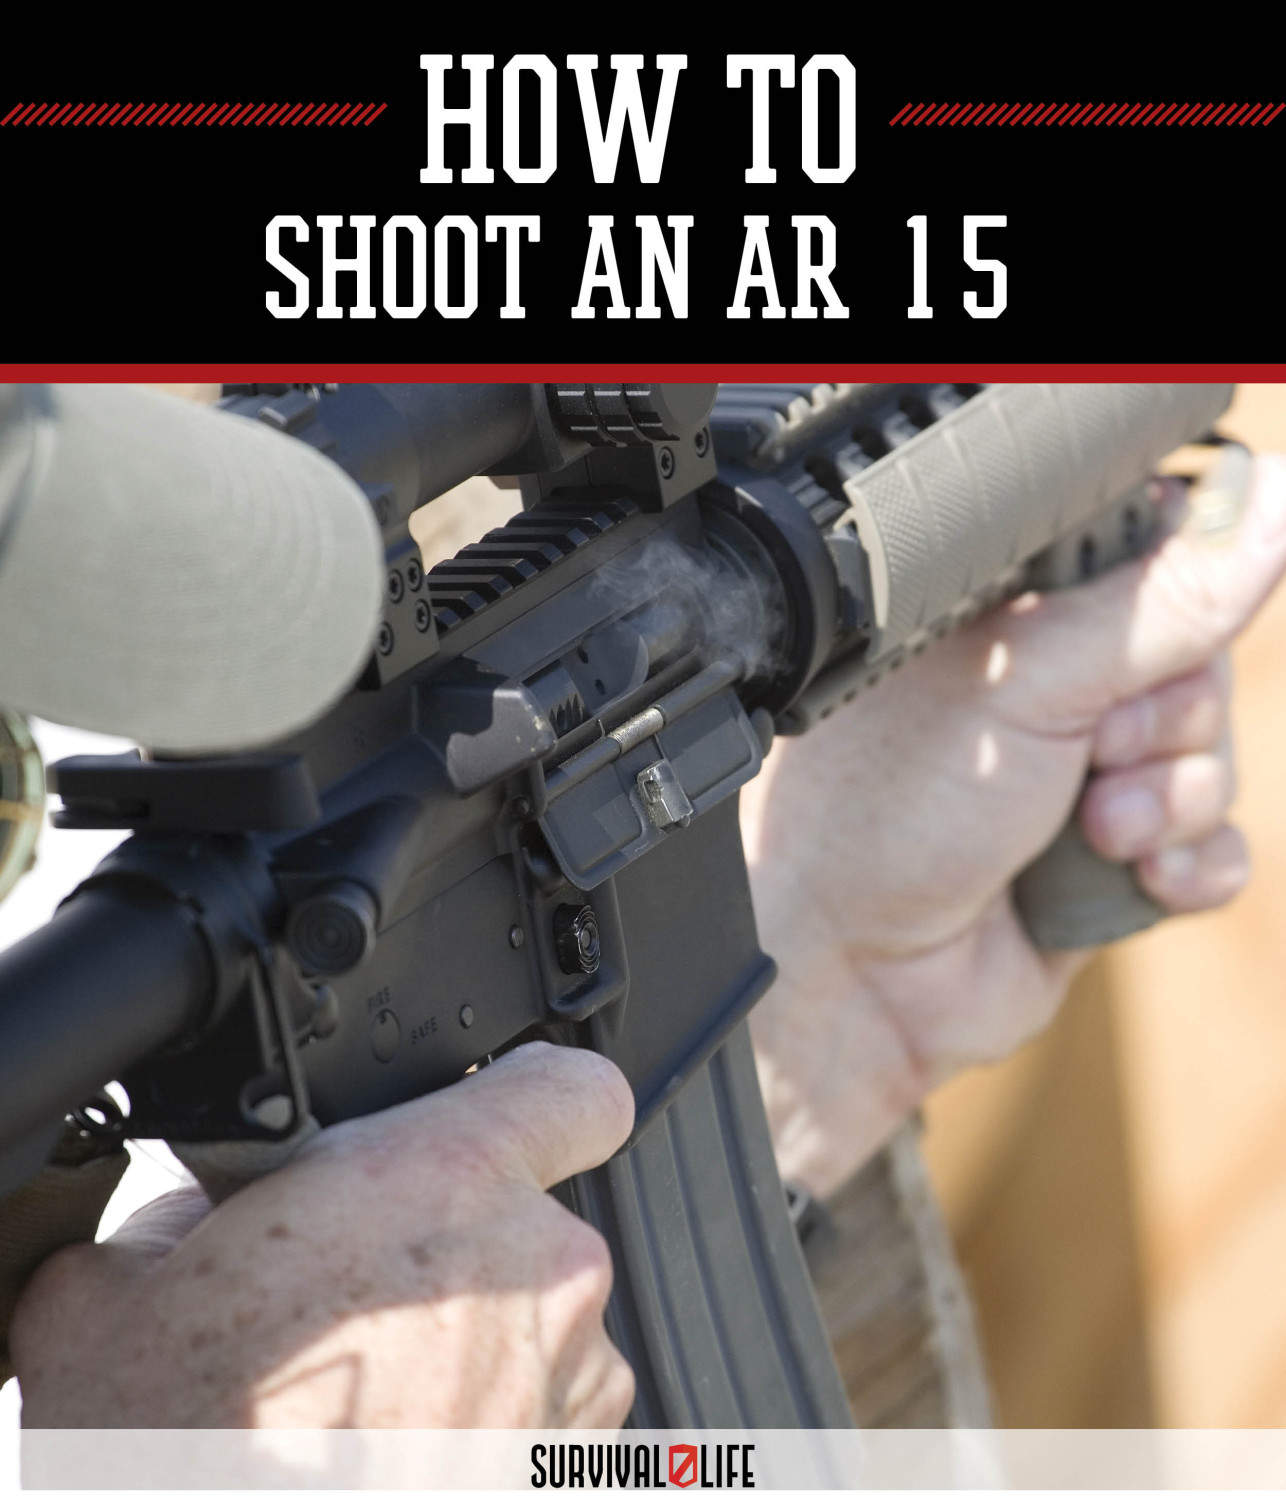 How to Shoot an AR-15 by Survival Life at